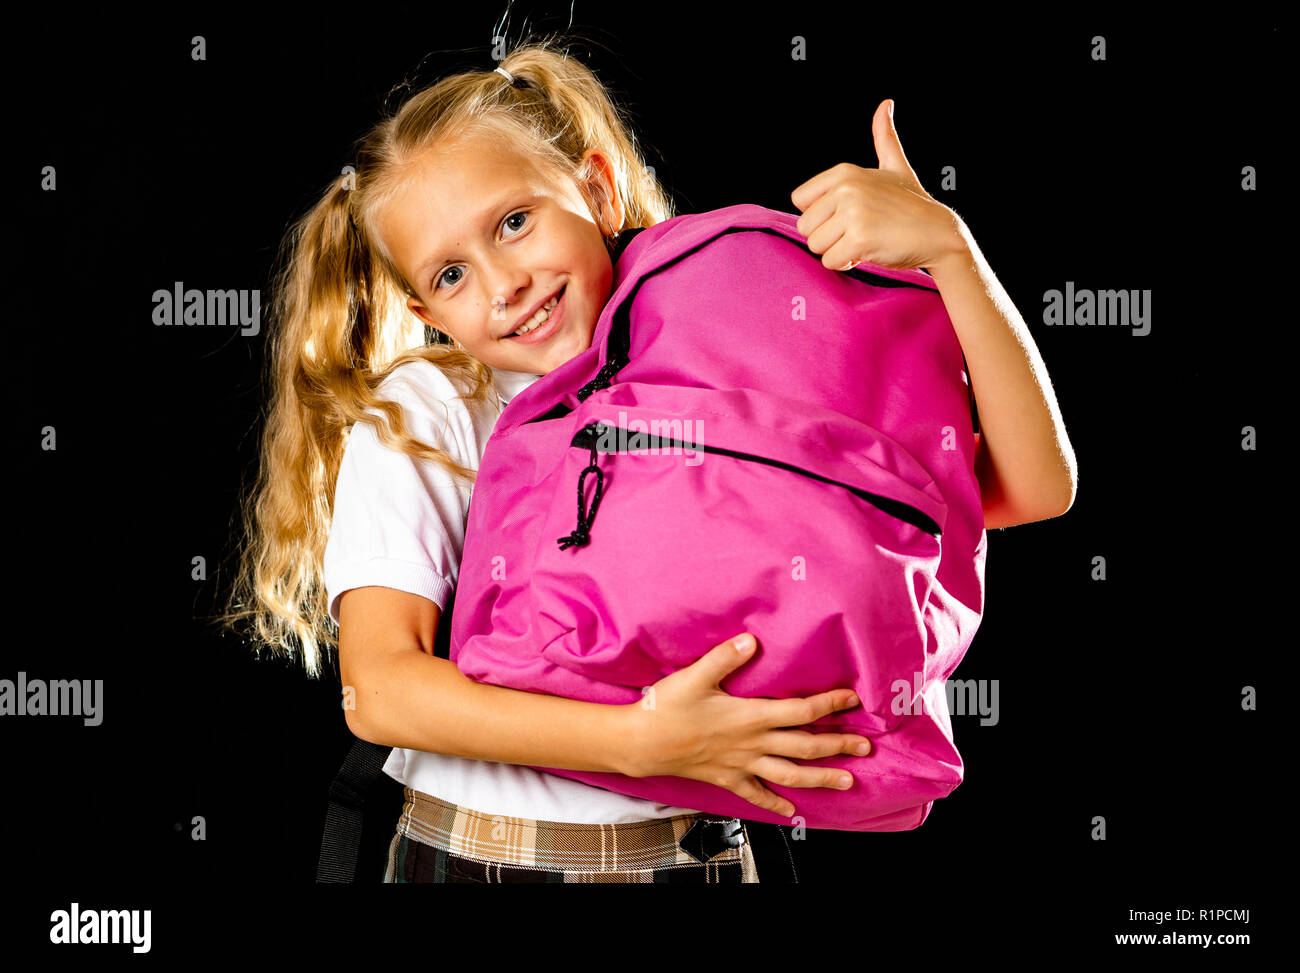 Pretty Cute Blonde Hair Girl With A Pink Schoolbag Looking At